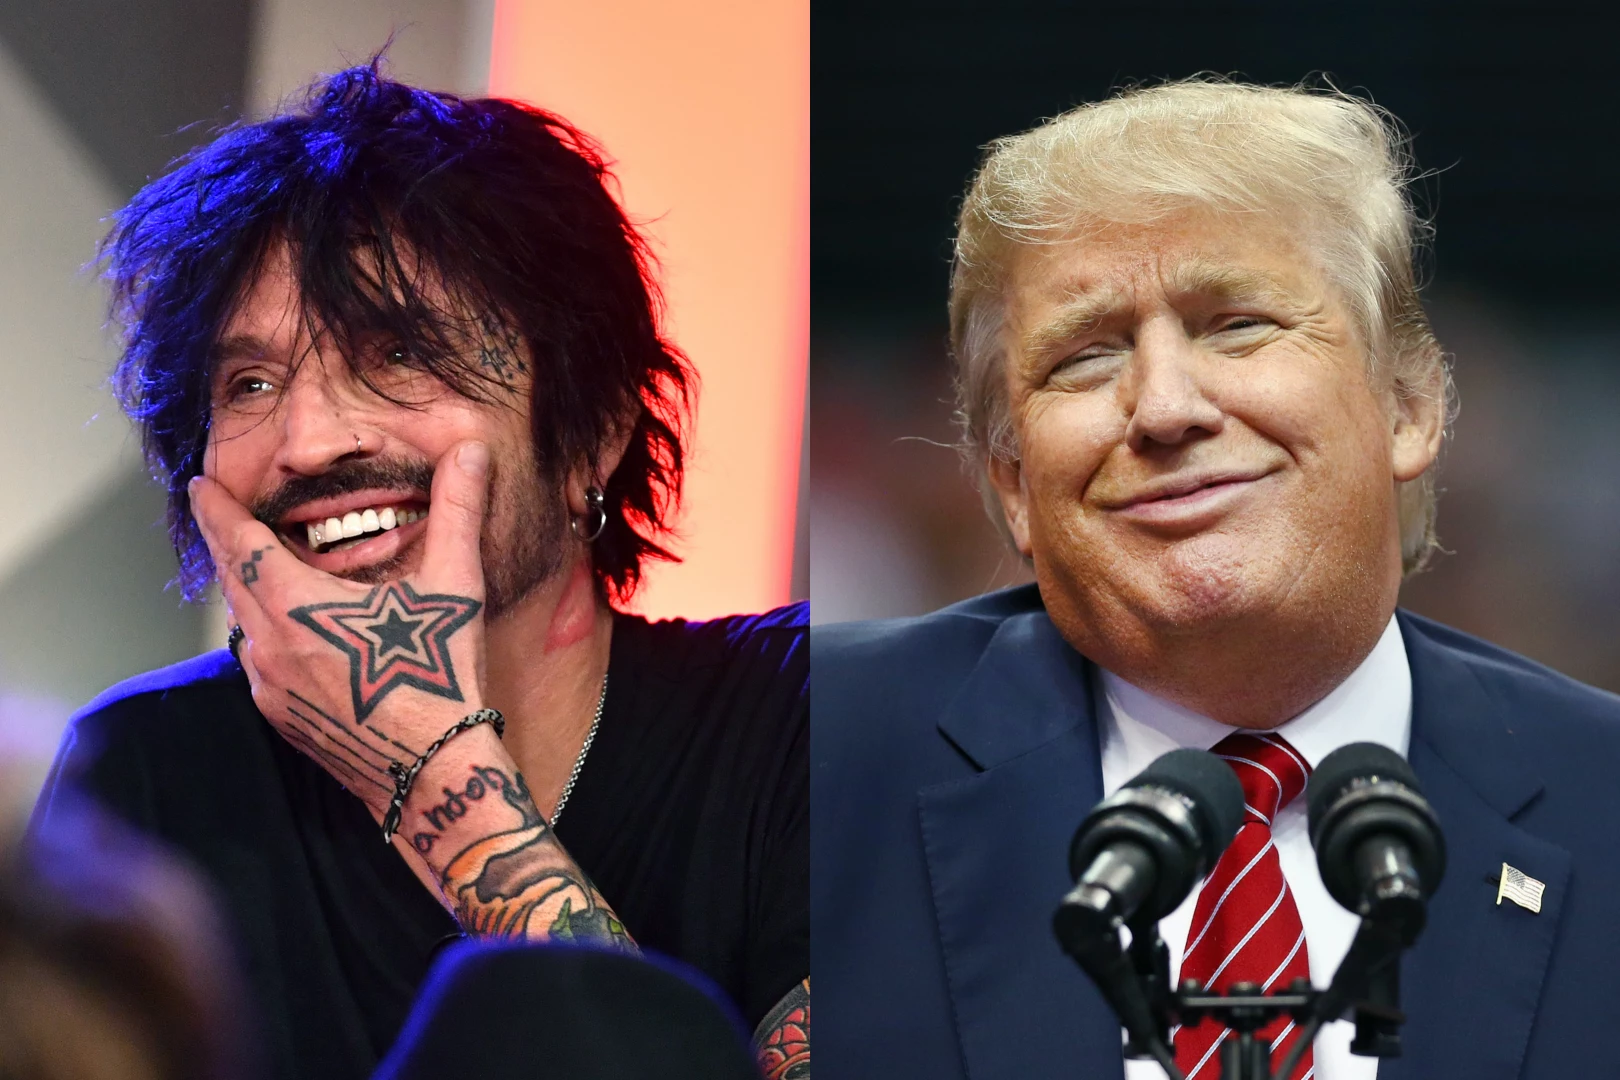 Motley Crue's Tommy Lee: I'll Leave the . if Trump Re-Elected